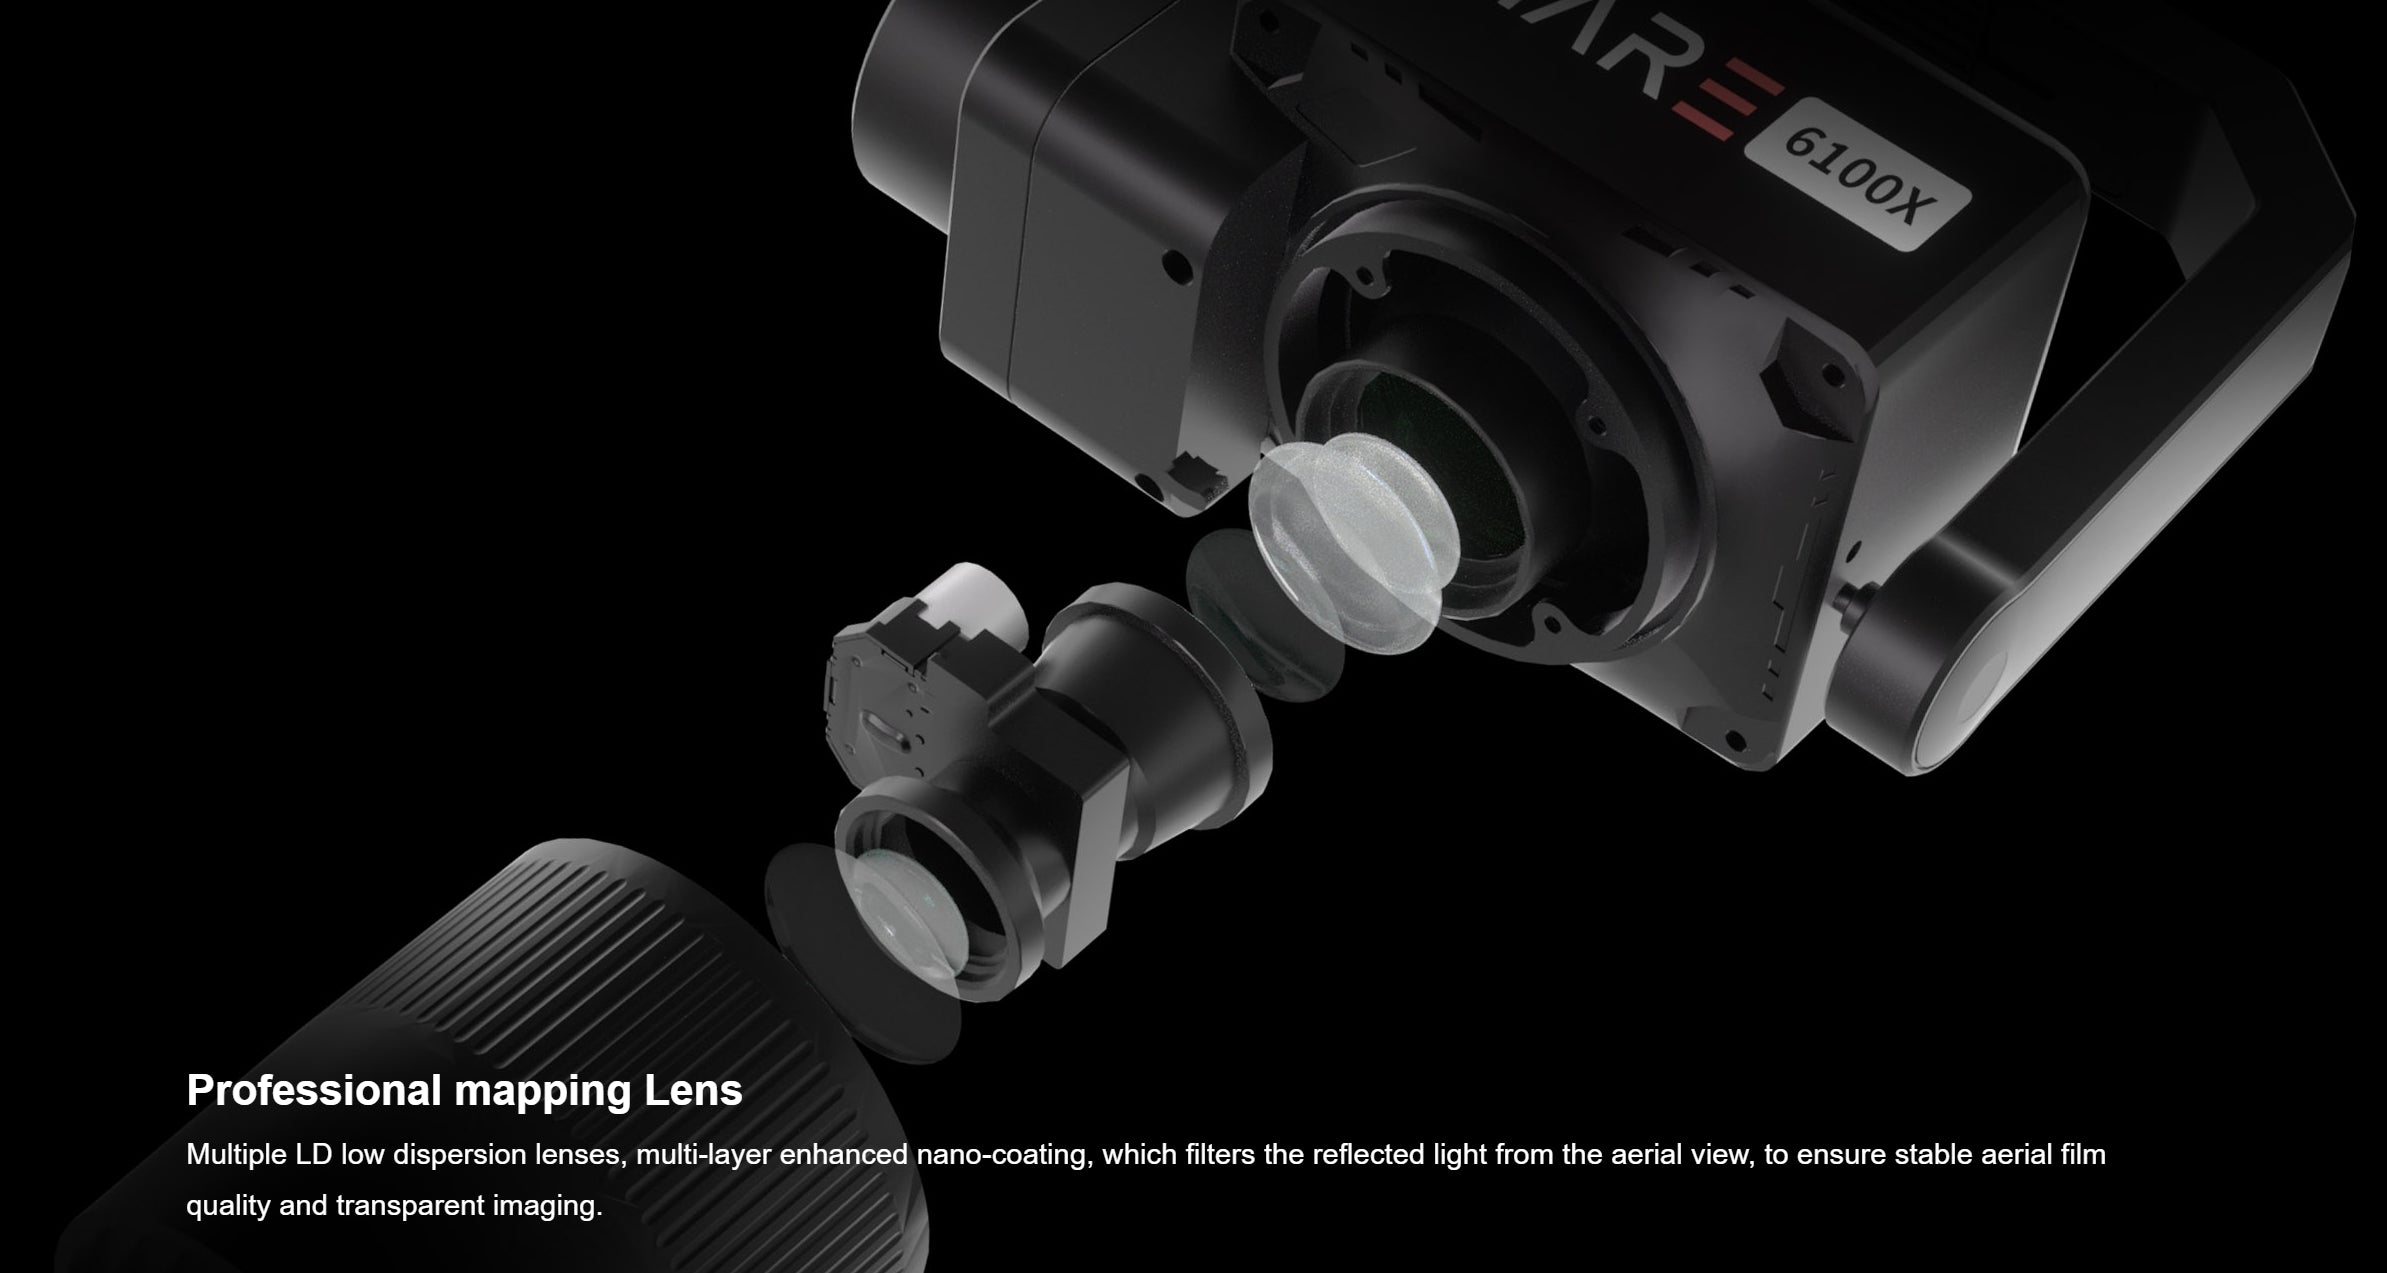 SHARE 6100X, High-quality aerial filming with stable and clear images thanks to advanced lens technology.